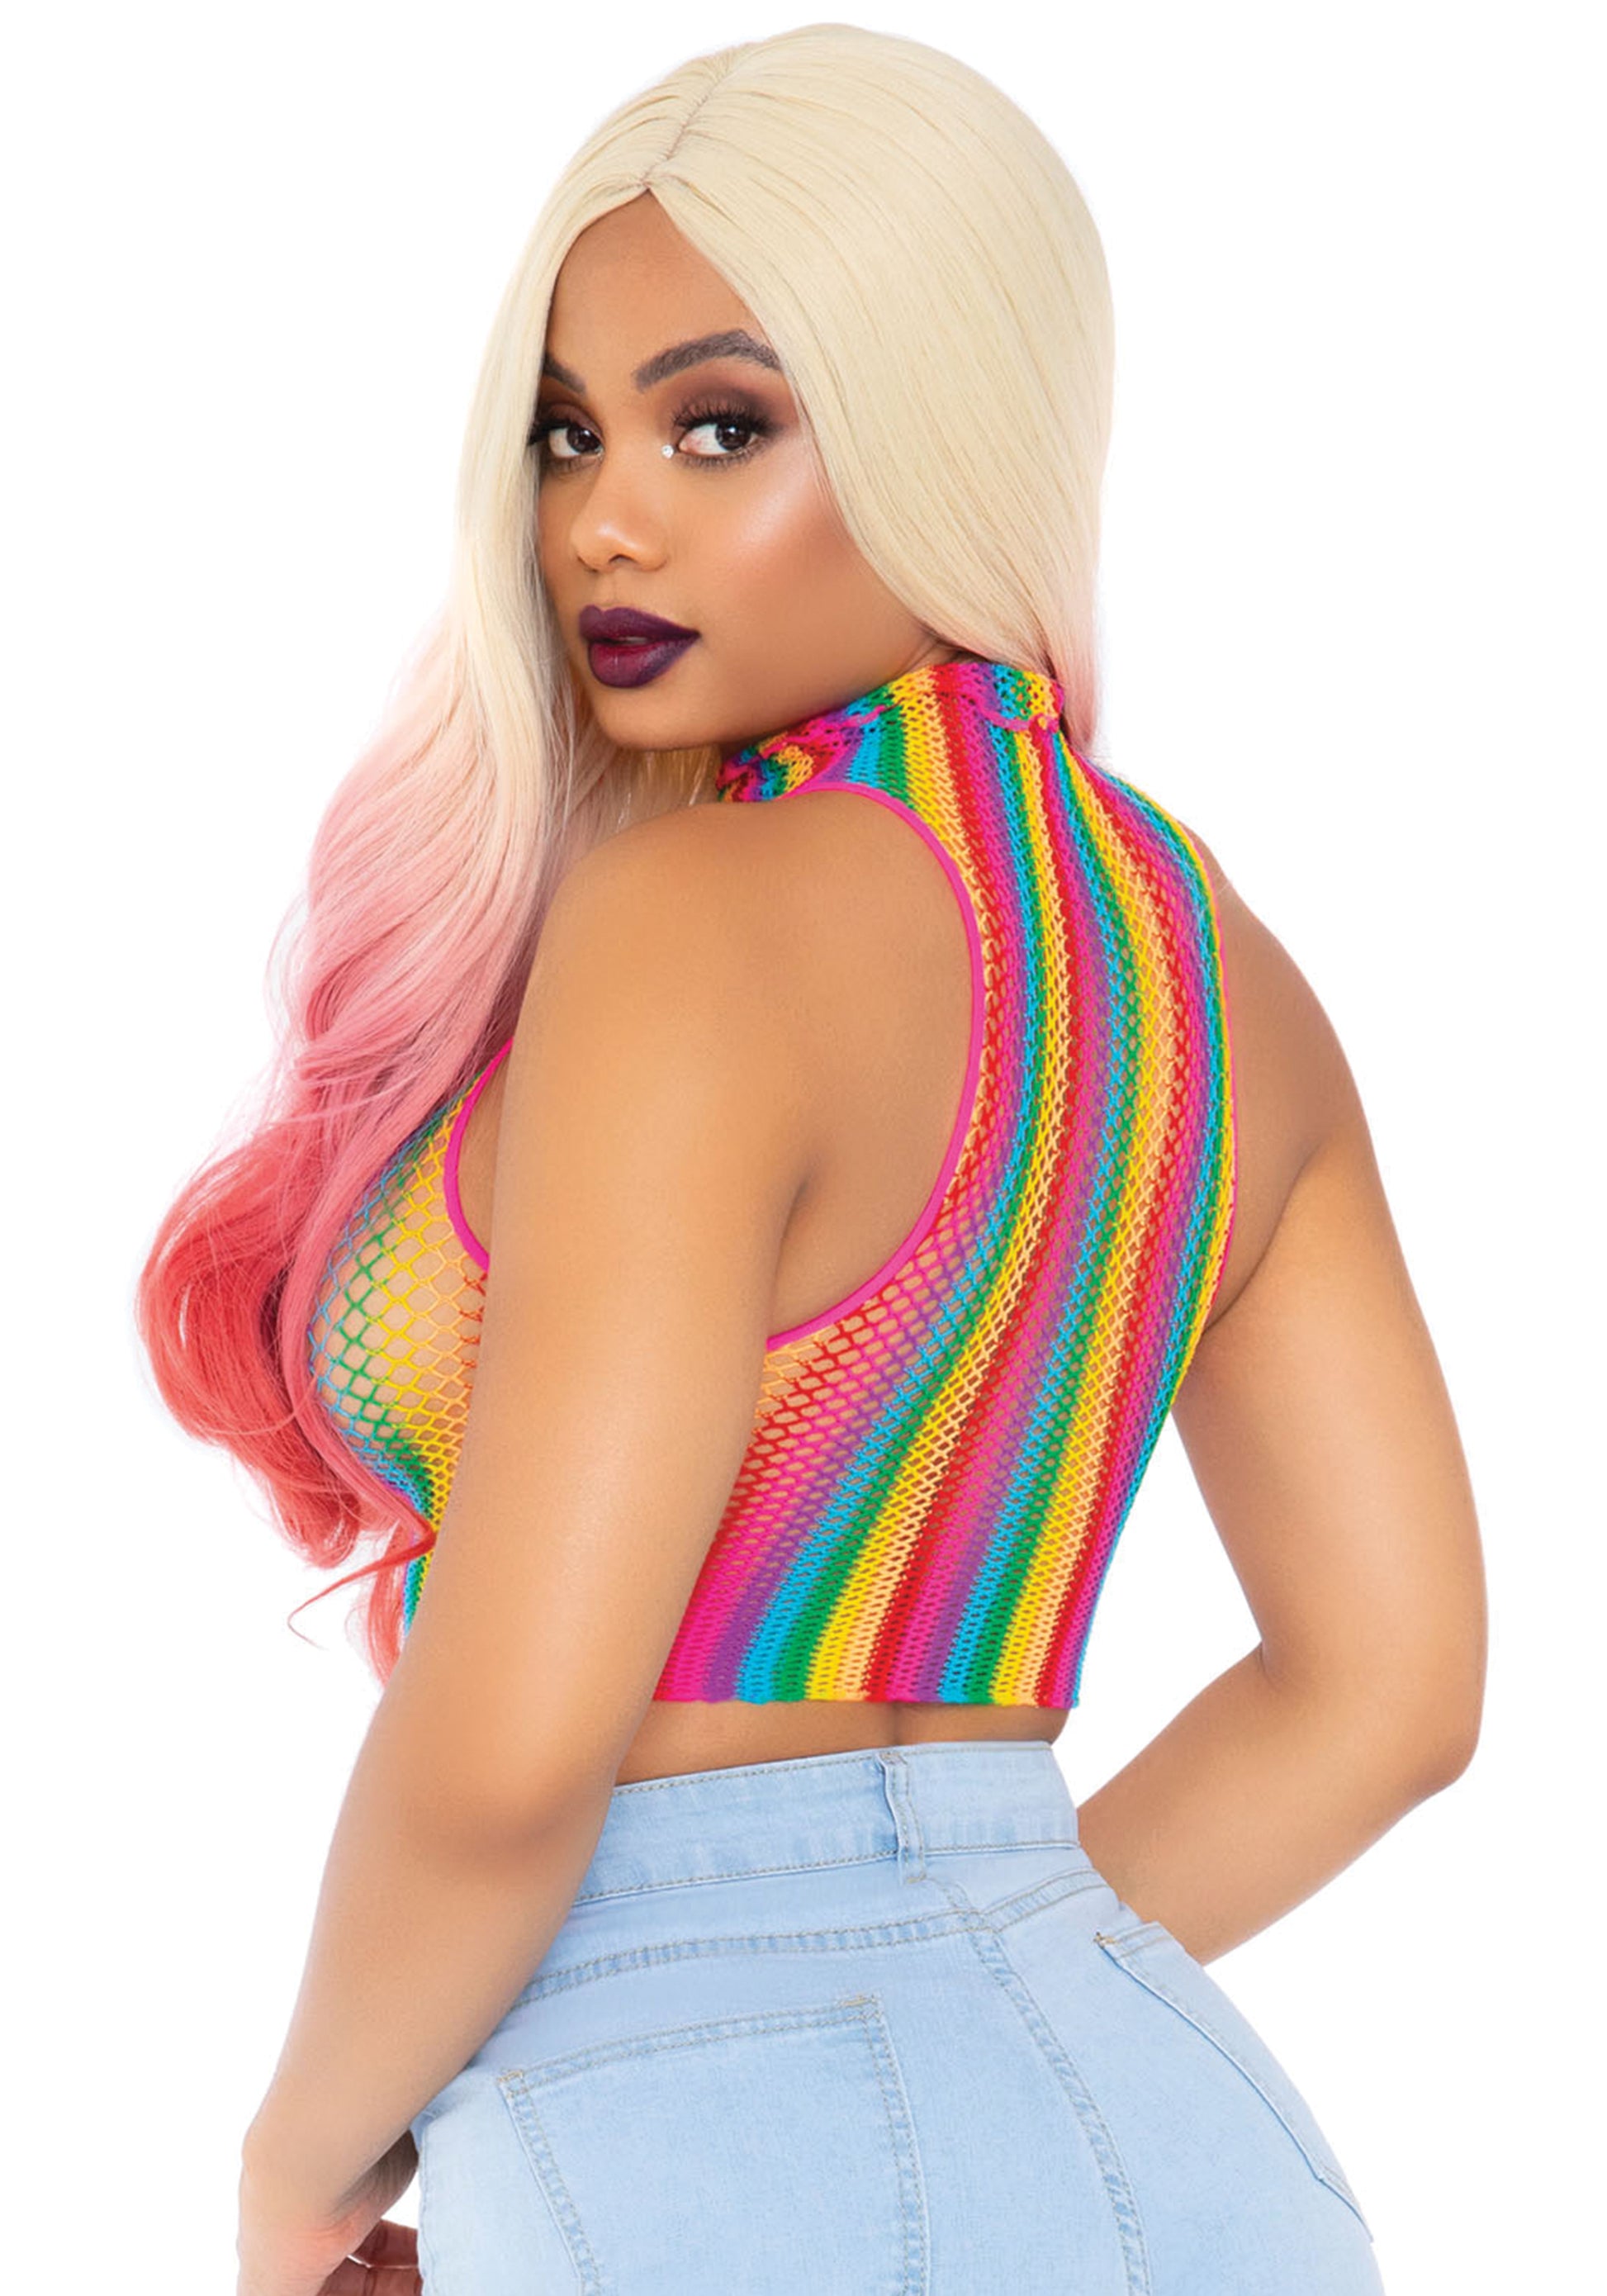 Leg Avenue 81610 Rainbow Net Crop Top - Multicoloured vertical striped high neck fishnet cropped top. Perfect for festivals.